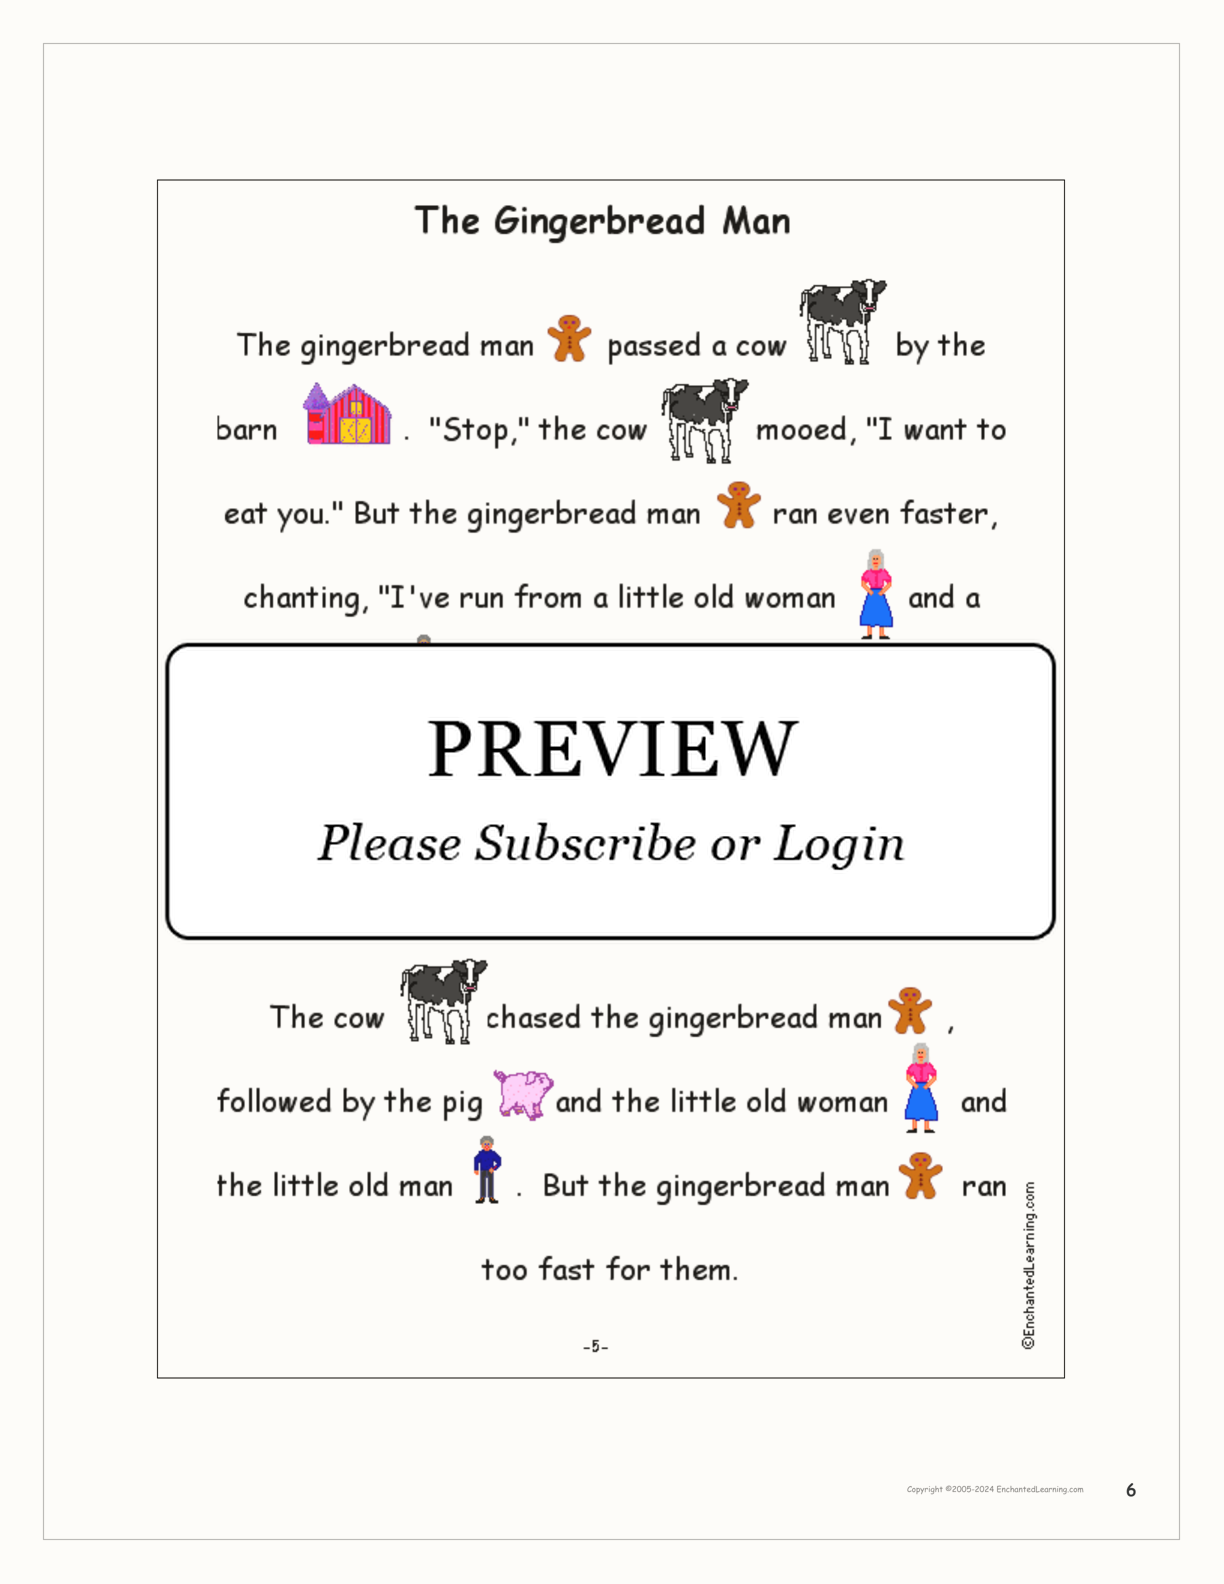 'The Gingerbread Man' Book interactive printout page 6